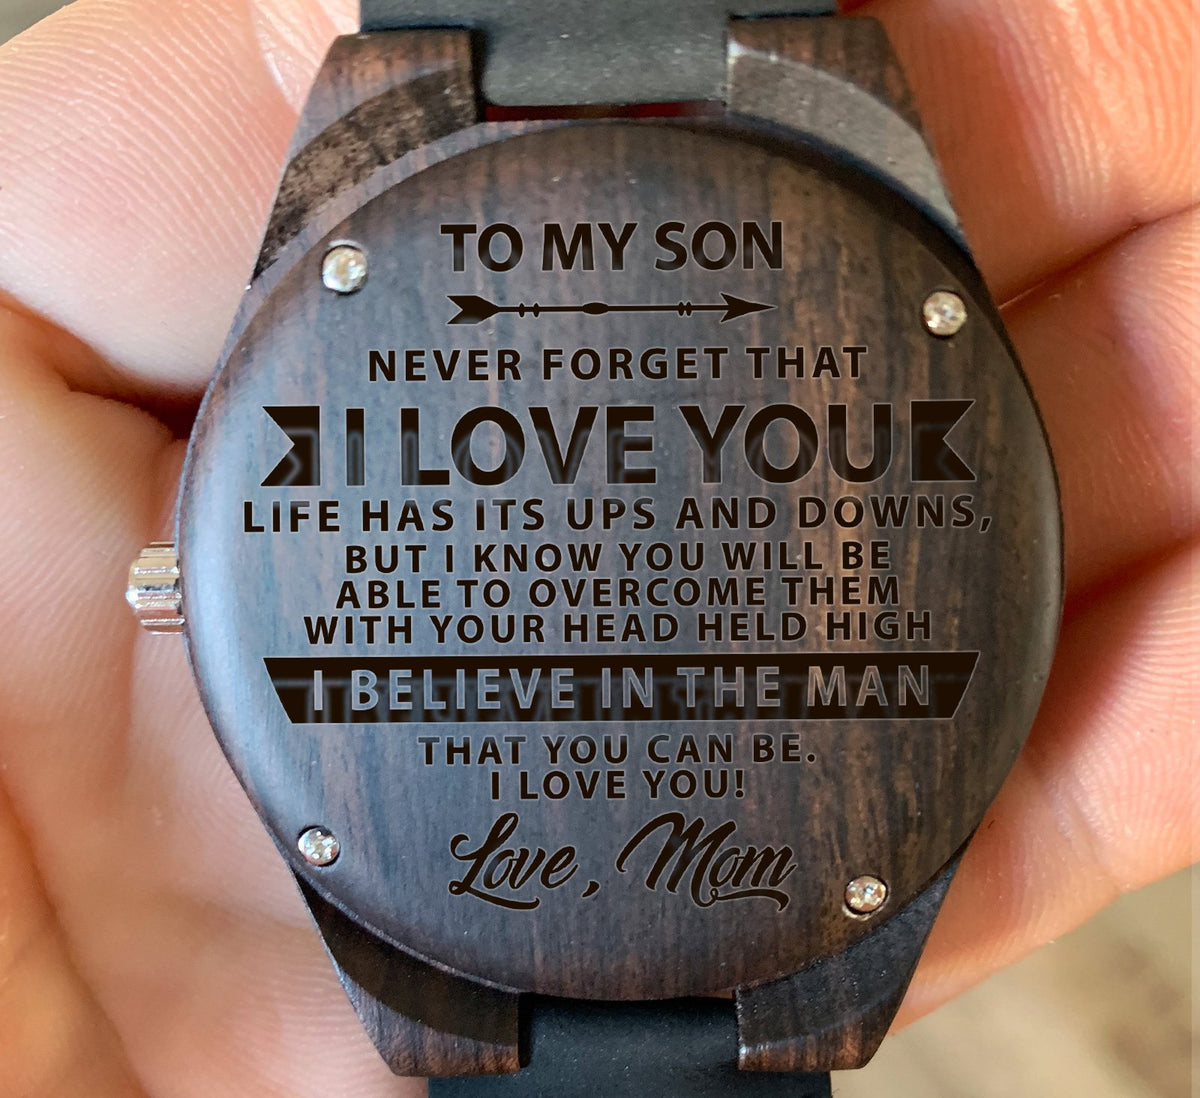 To My Son - I Believe in the Man That You Can Be. I LOVE YOU! - Wooden Watch